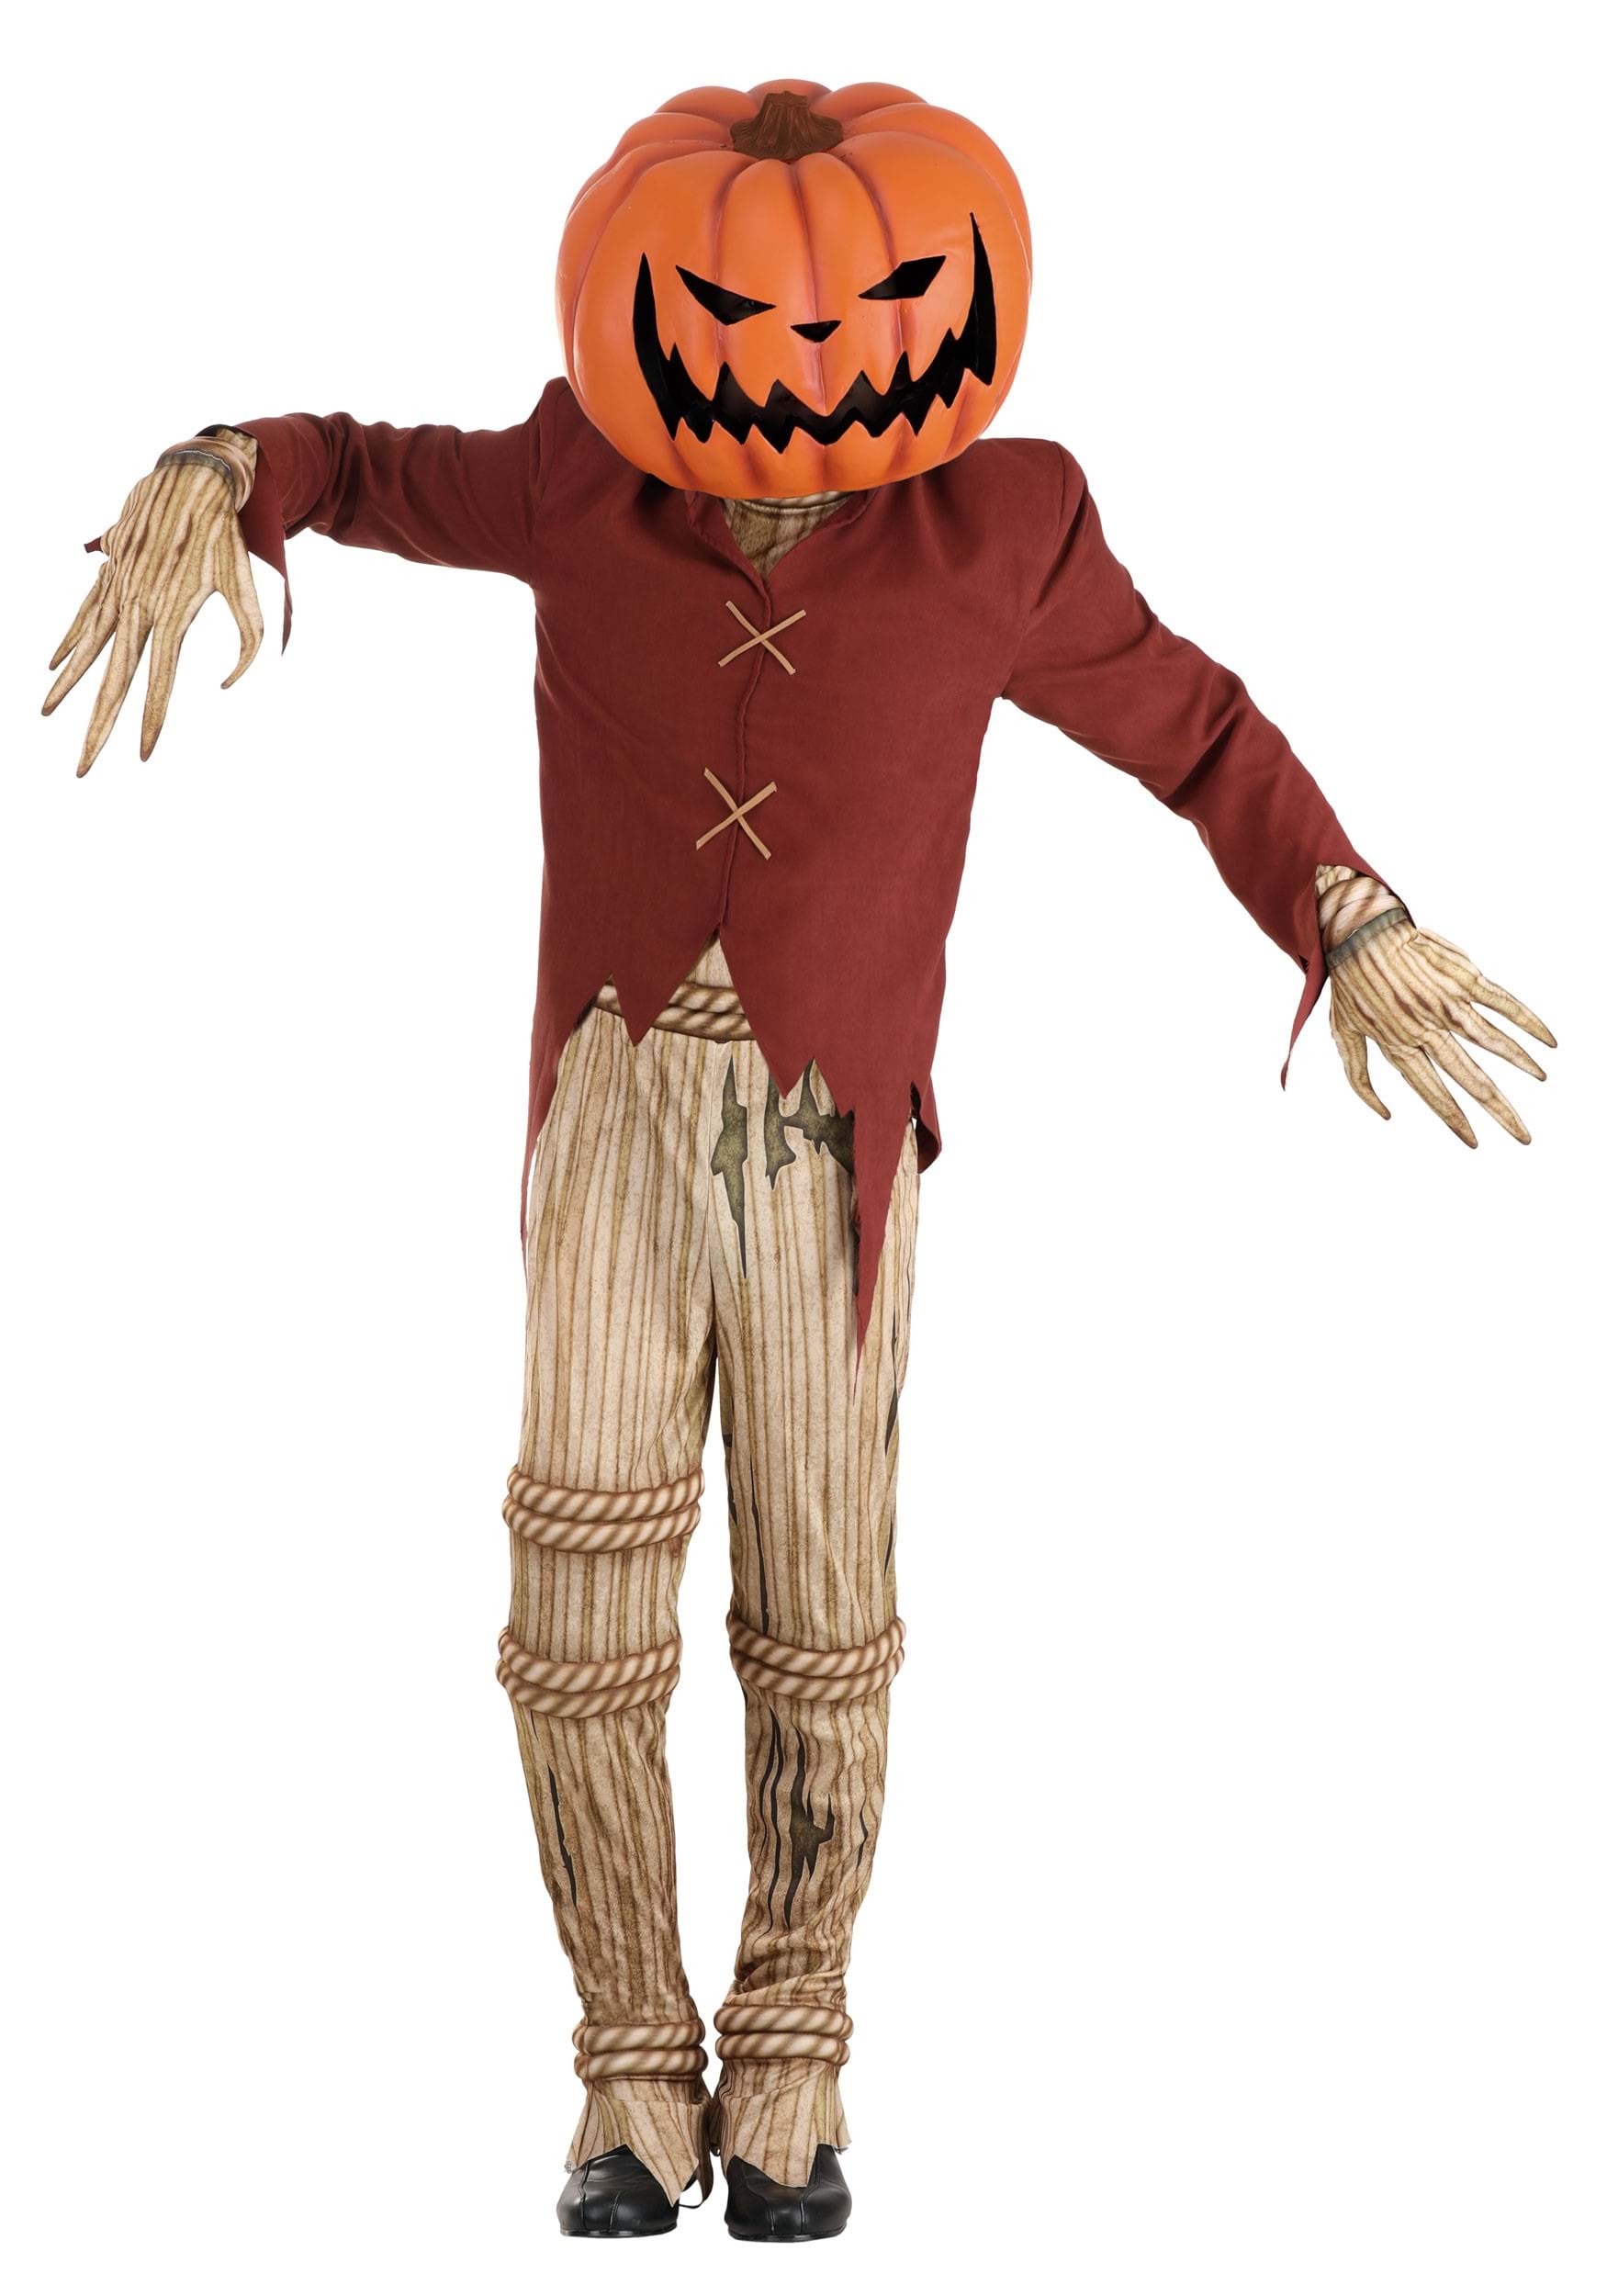 Image of Jack the Pumpkin King Costume for Adults ID FUN3364AD-S